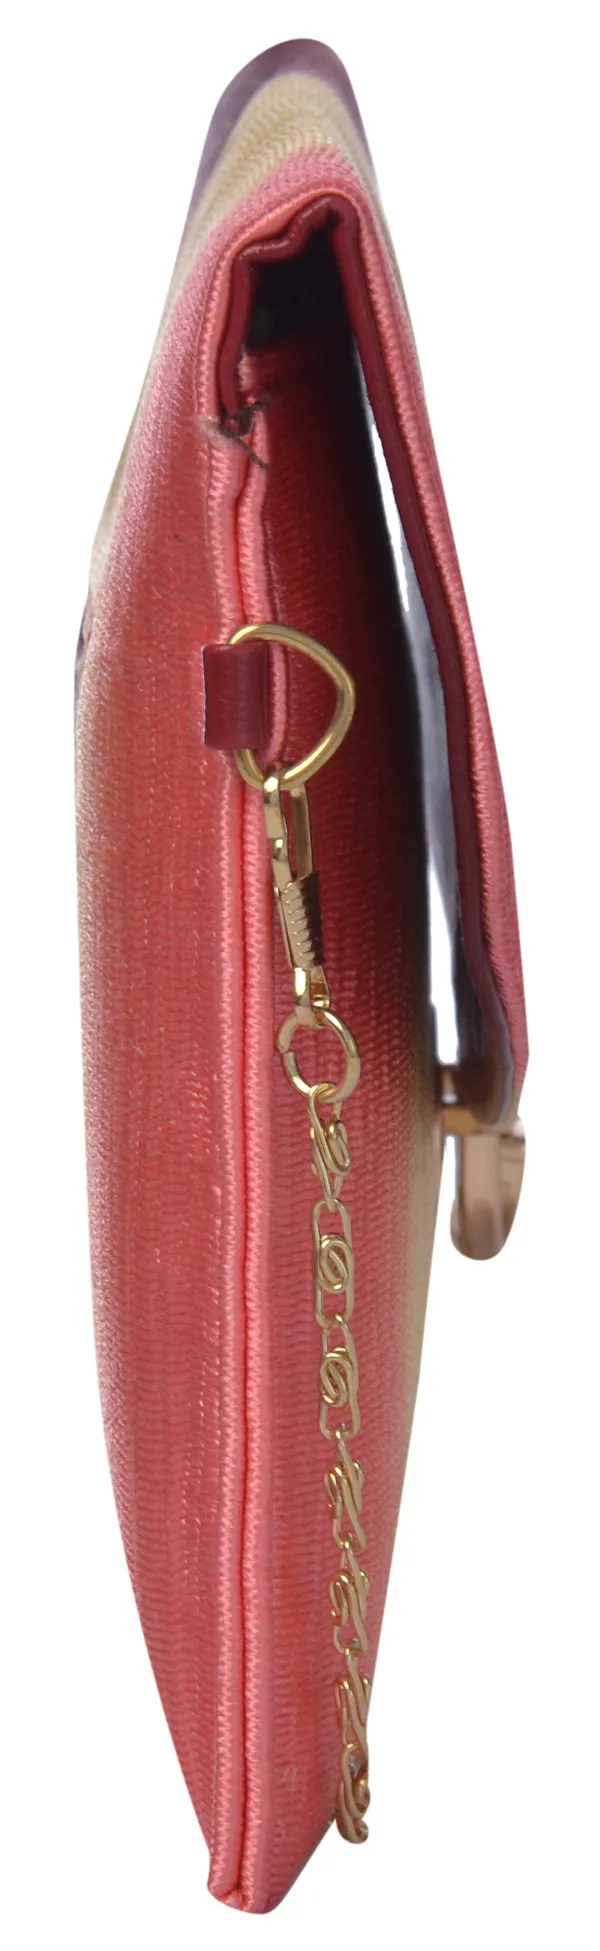 Exotique_Women's_Red_Sling_Bag_(CW0014RD)__Exotique